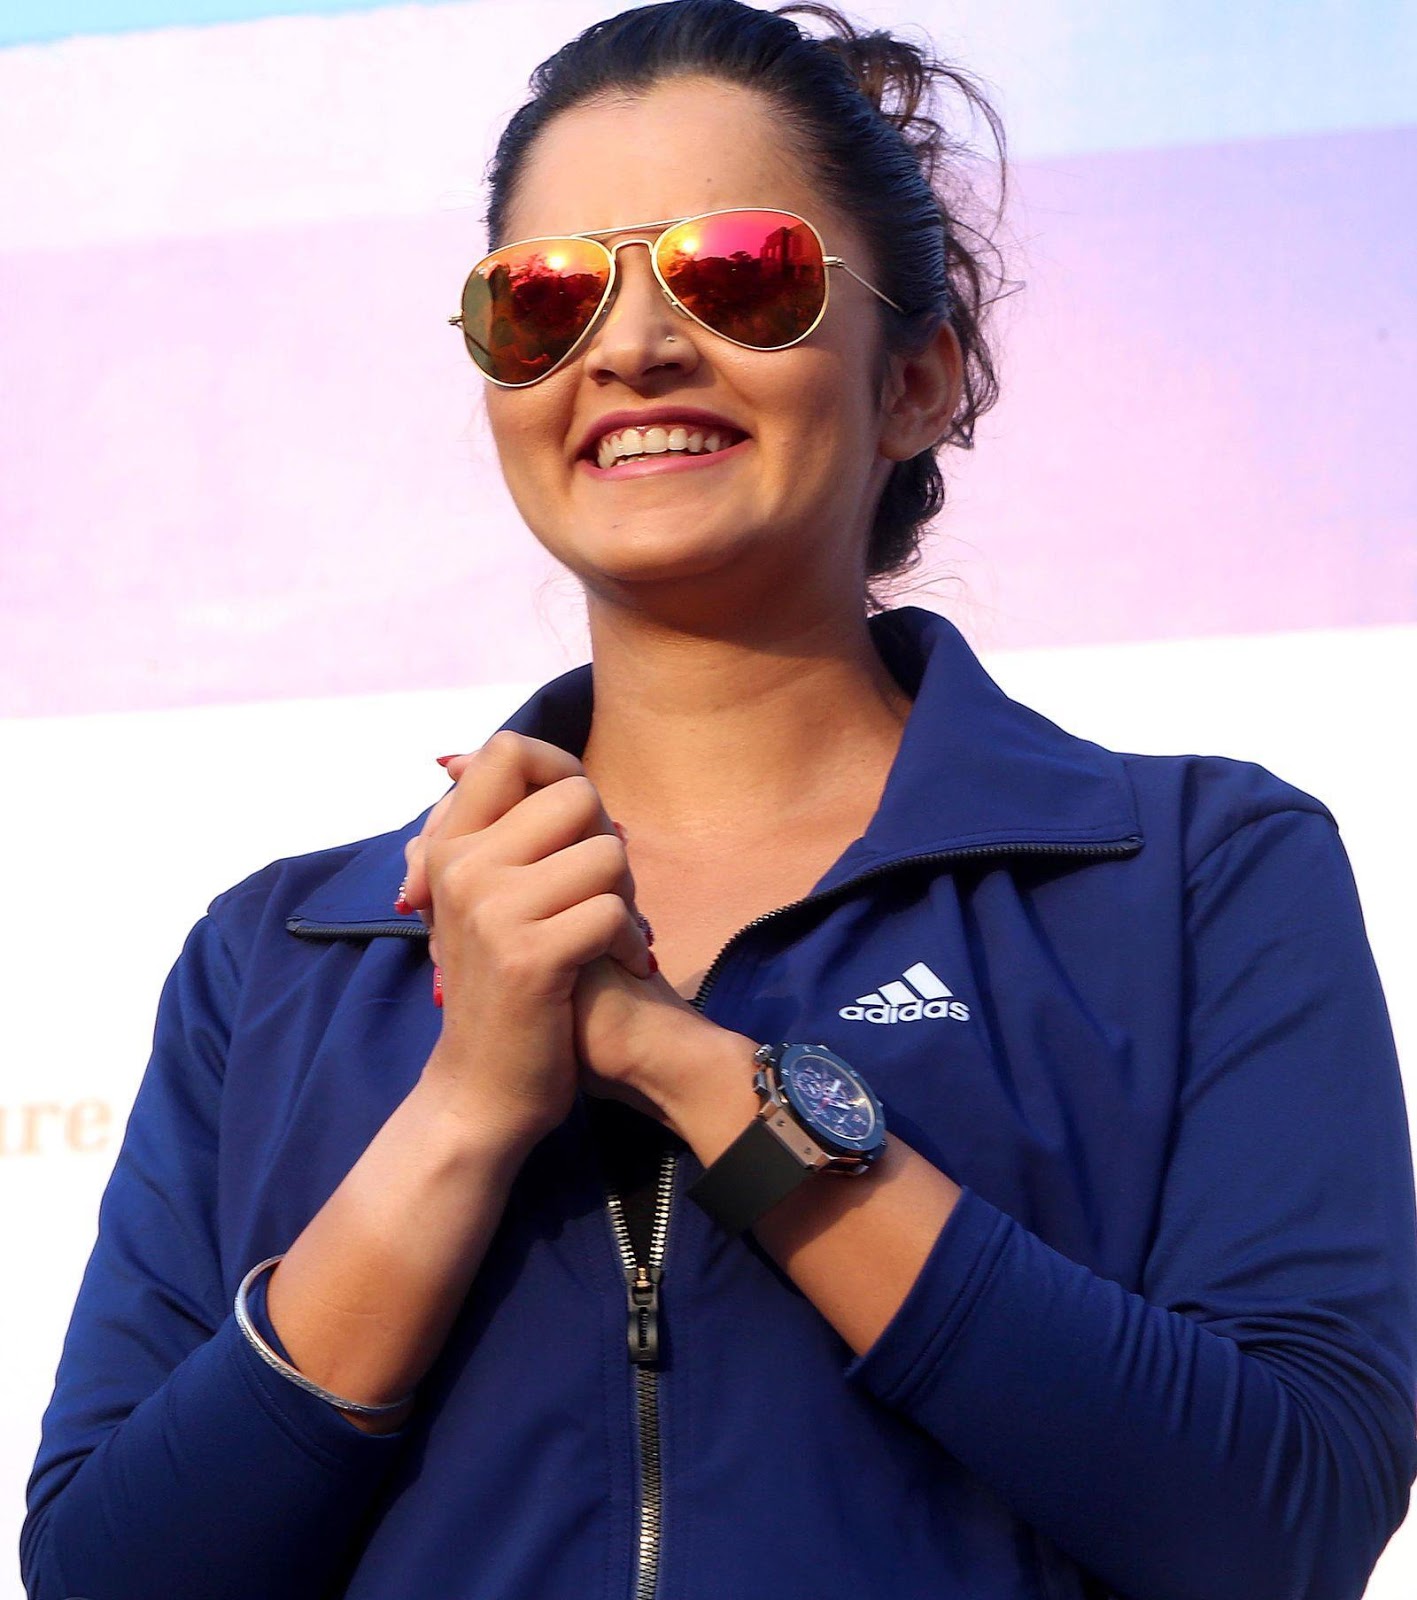 High Quality Bollywood Celebrity Pictures Sania Mirza Looks Super Sexy In Yoga Pants At Max